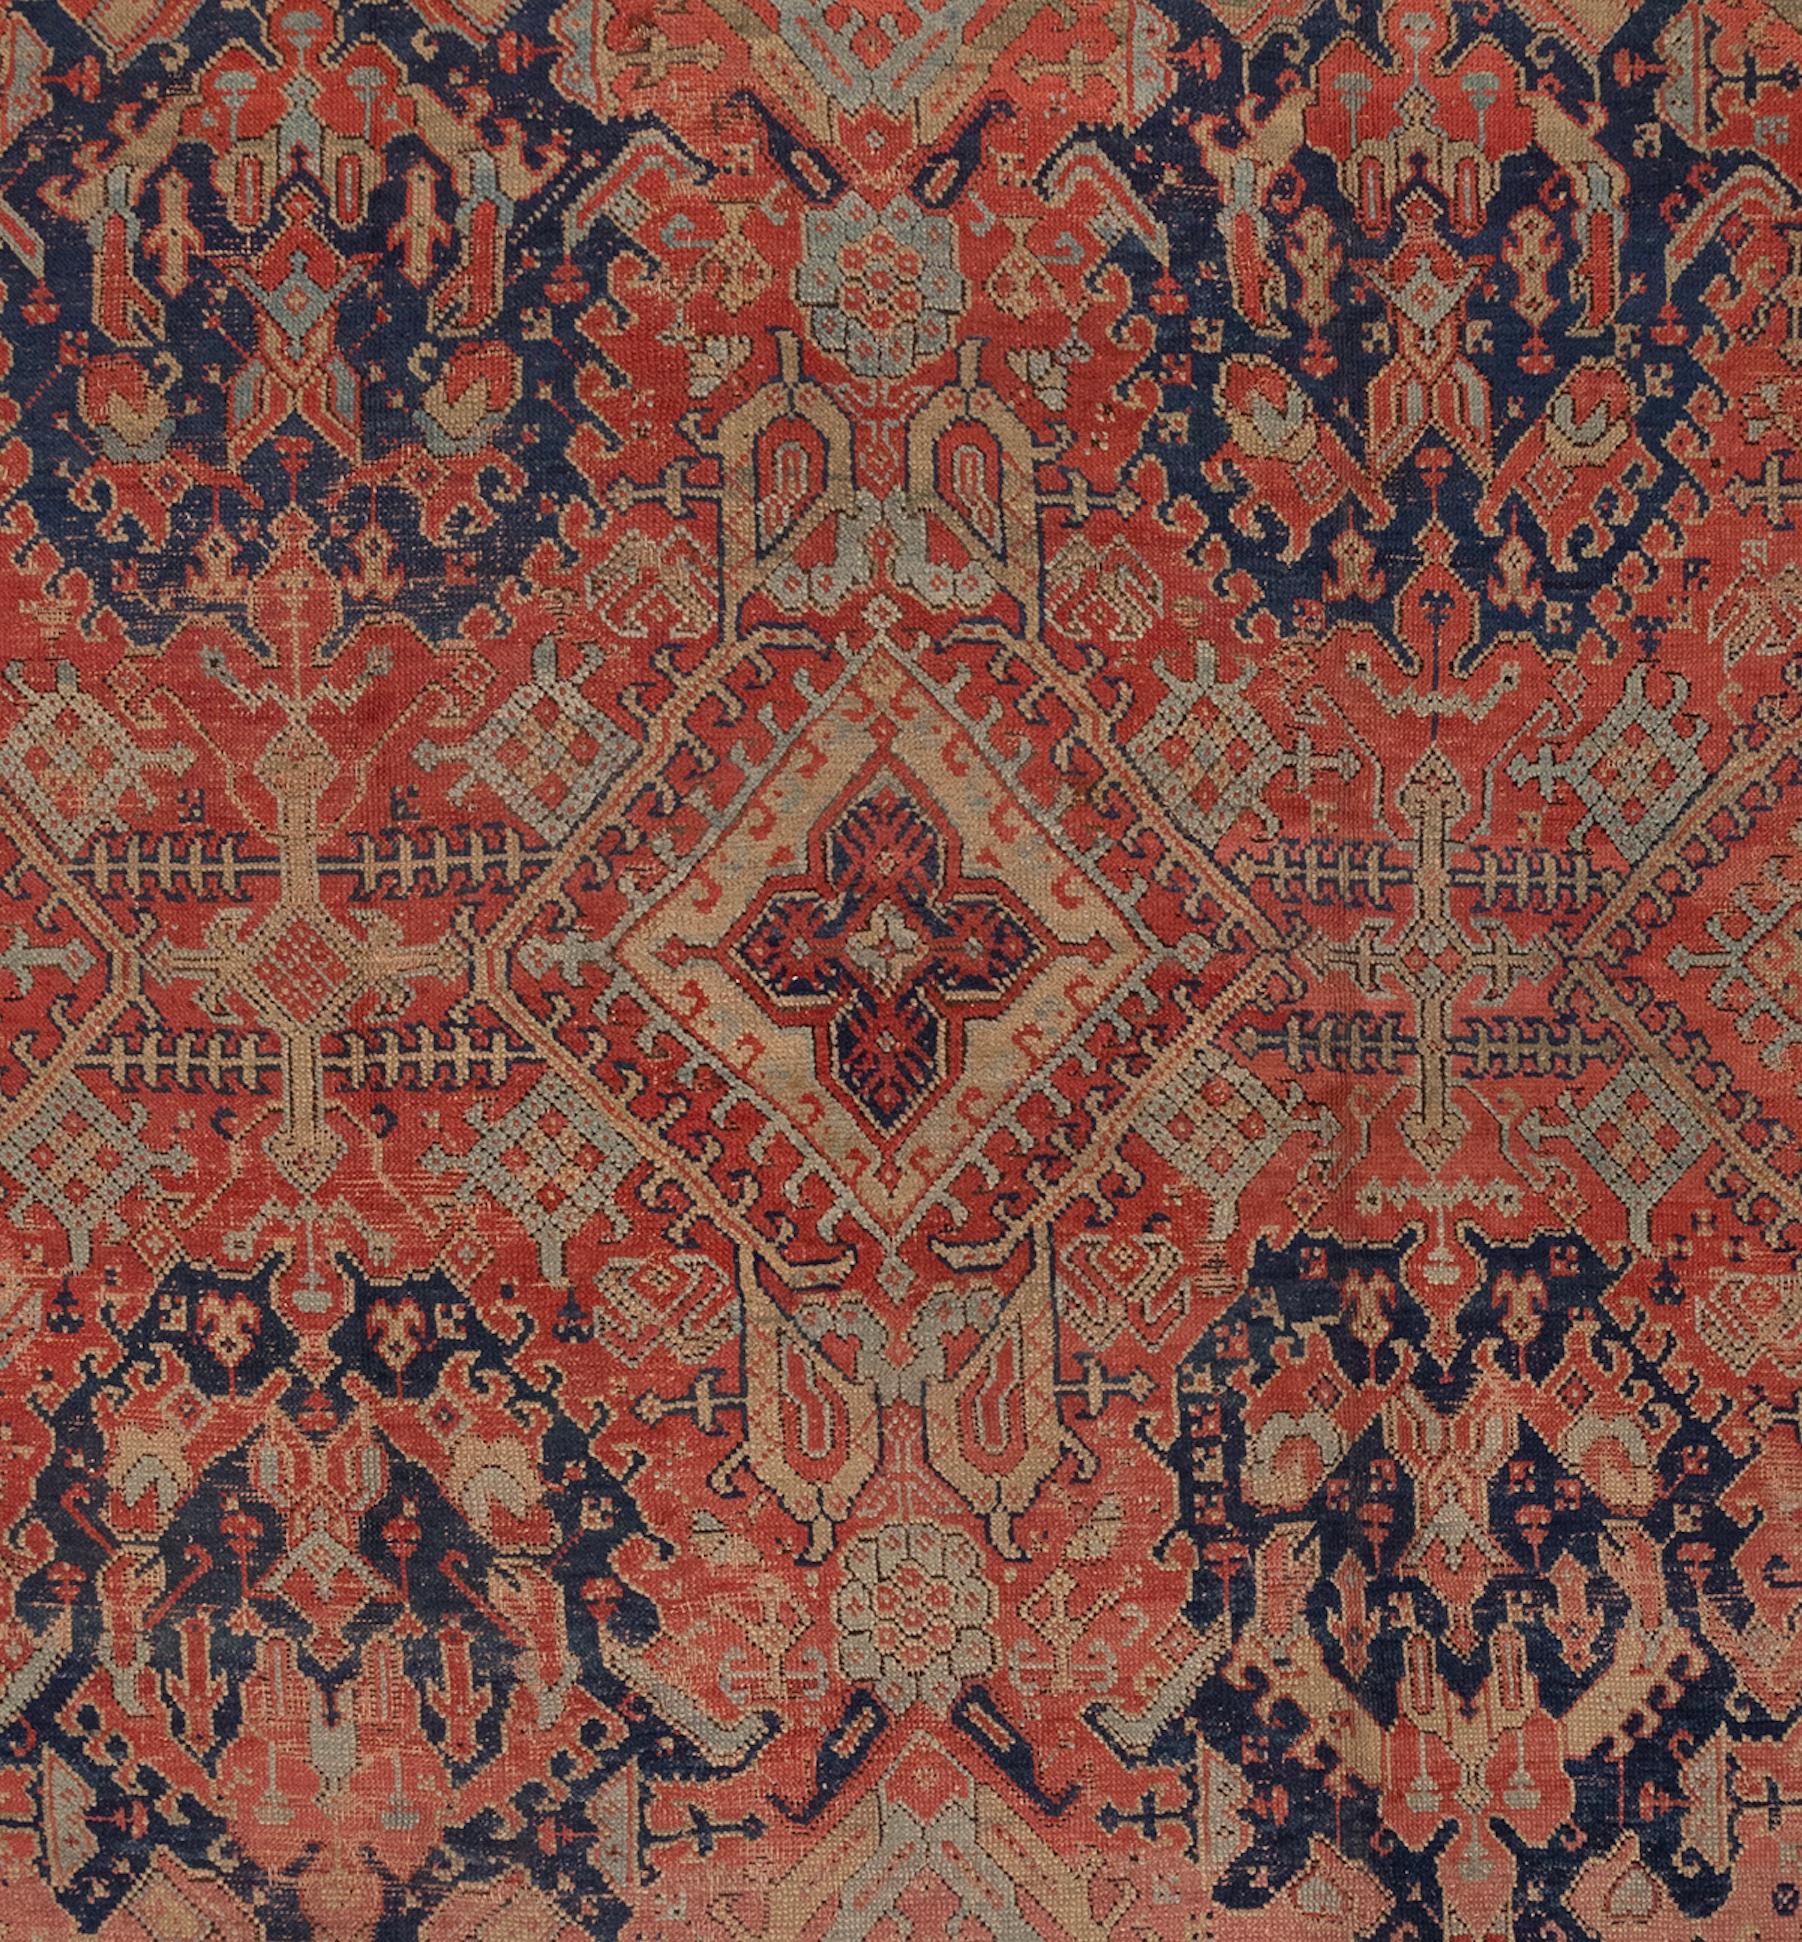 Large square Oushak rug with lovely red, navy, cream and light celedon green. This Oushak rug has a short, soft pile and is an unusual square size.